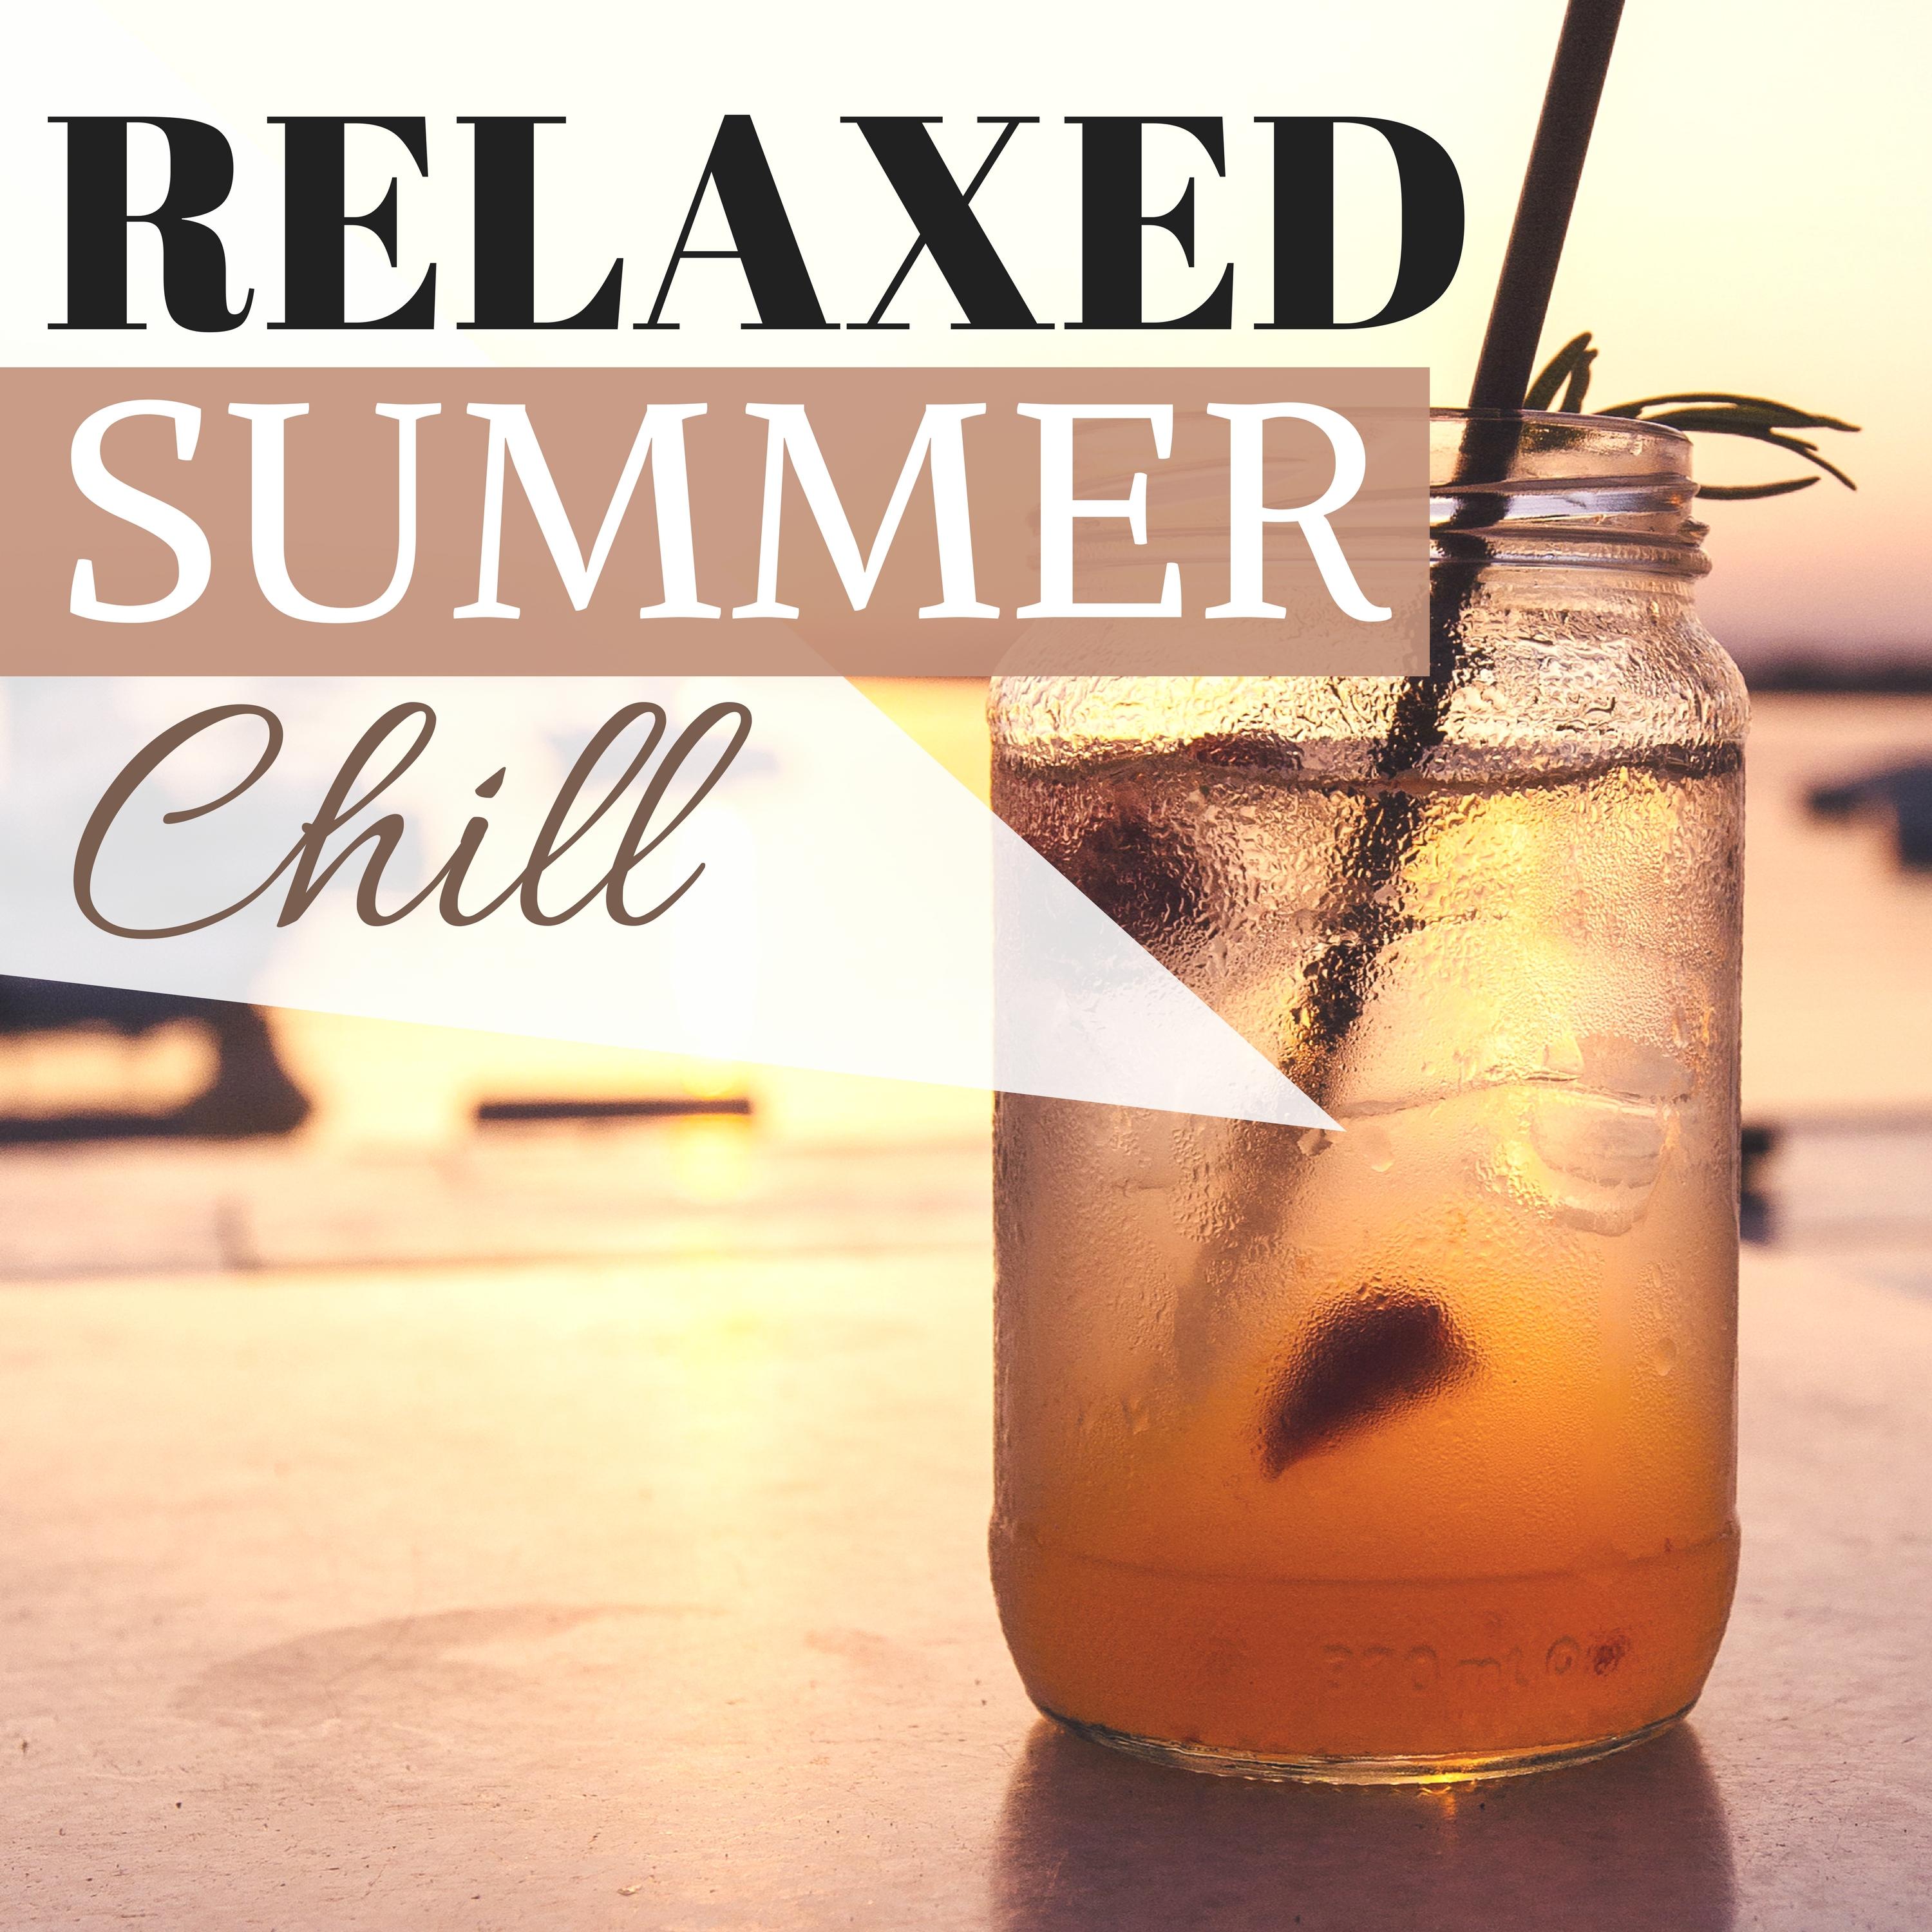 Relaxed Summer Chill - Ibiza Hotel Chillout del Mar, Easy Listening Sunset Afterhours